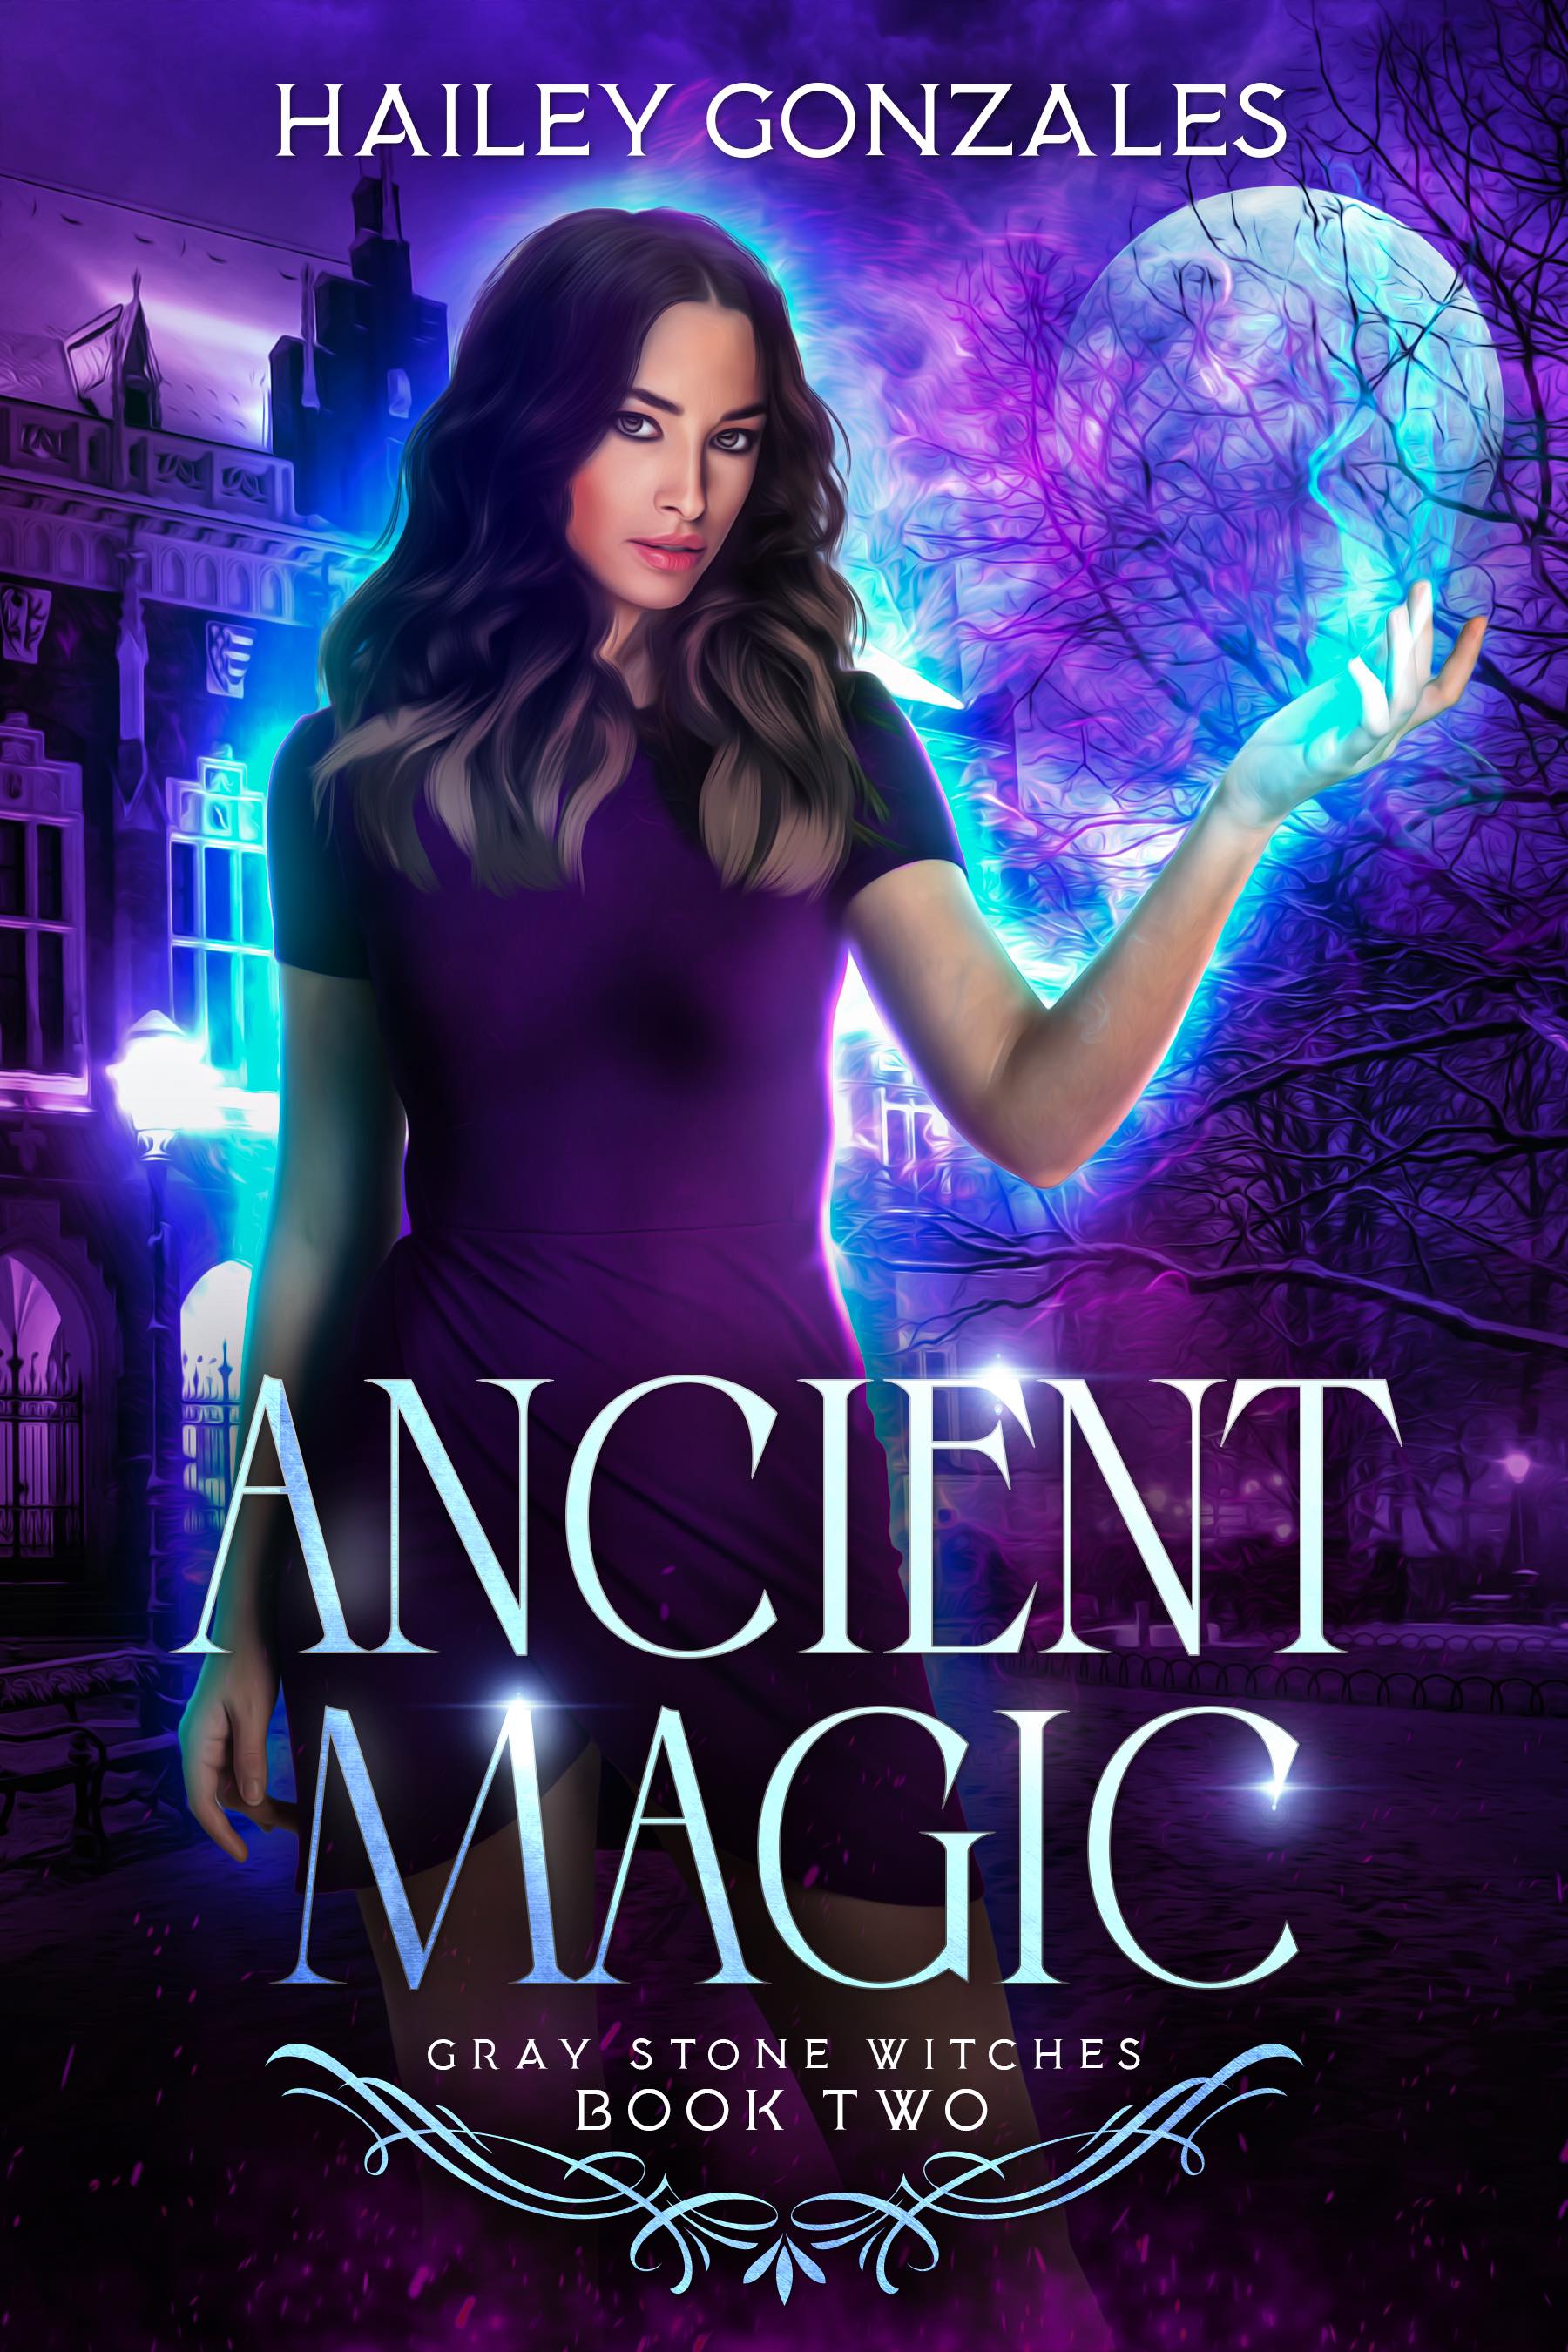 ancient-magic-gray-stone-witches-book-two